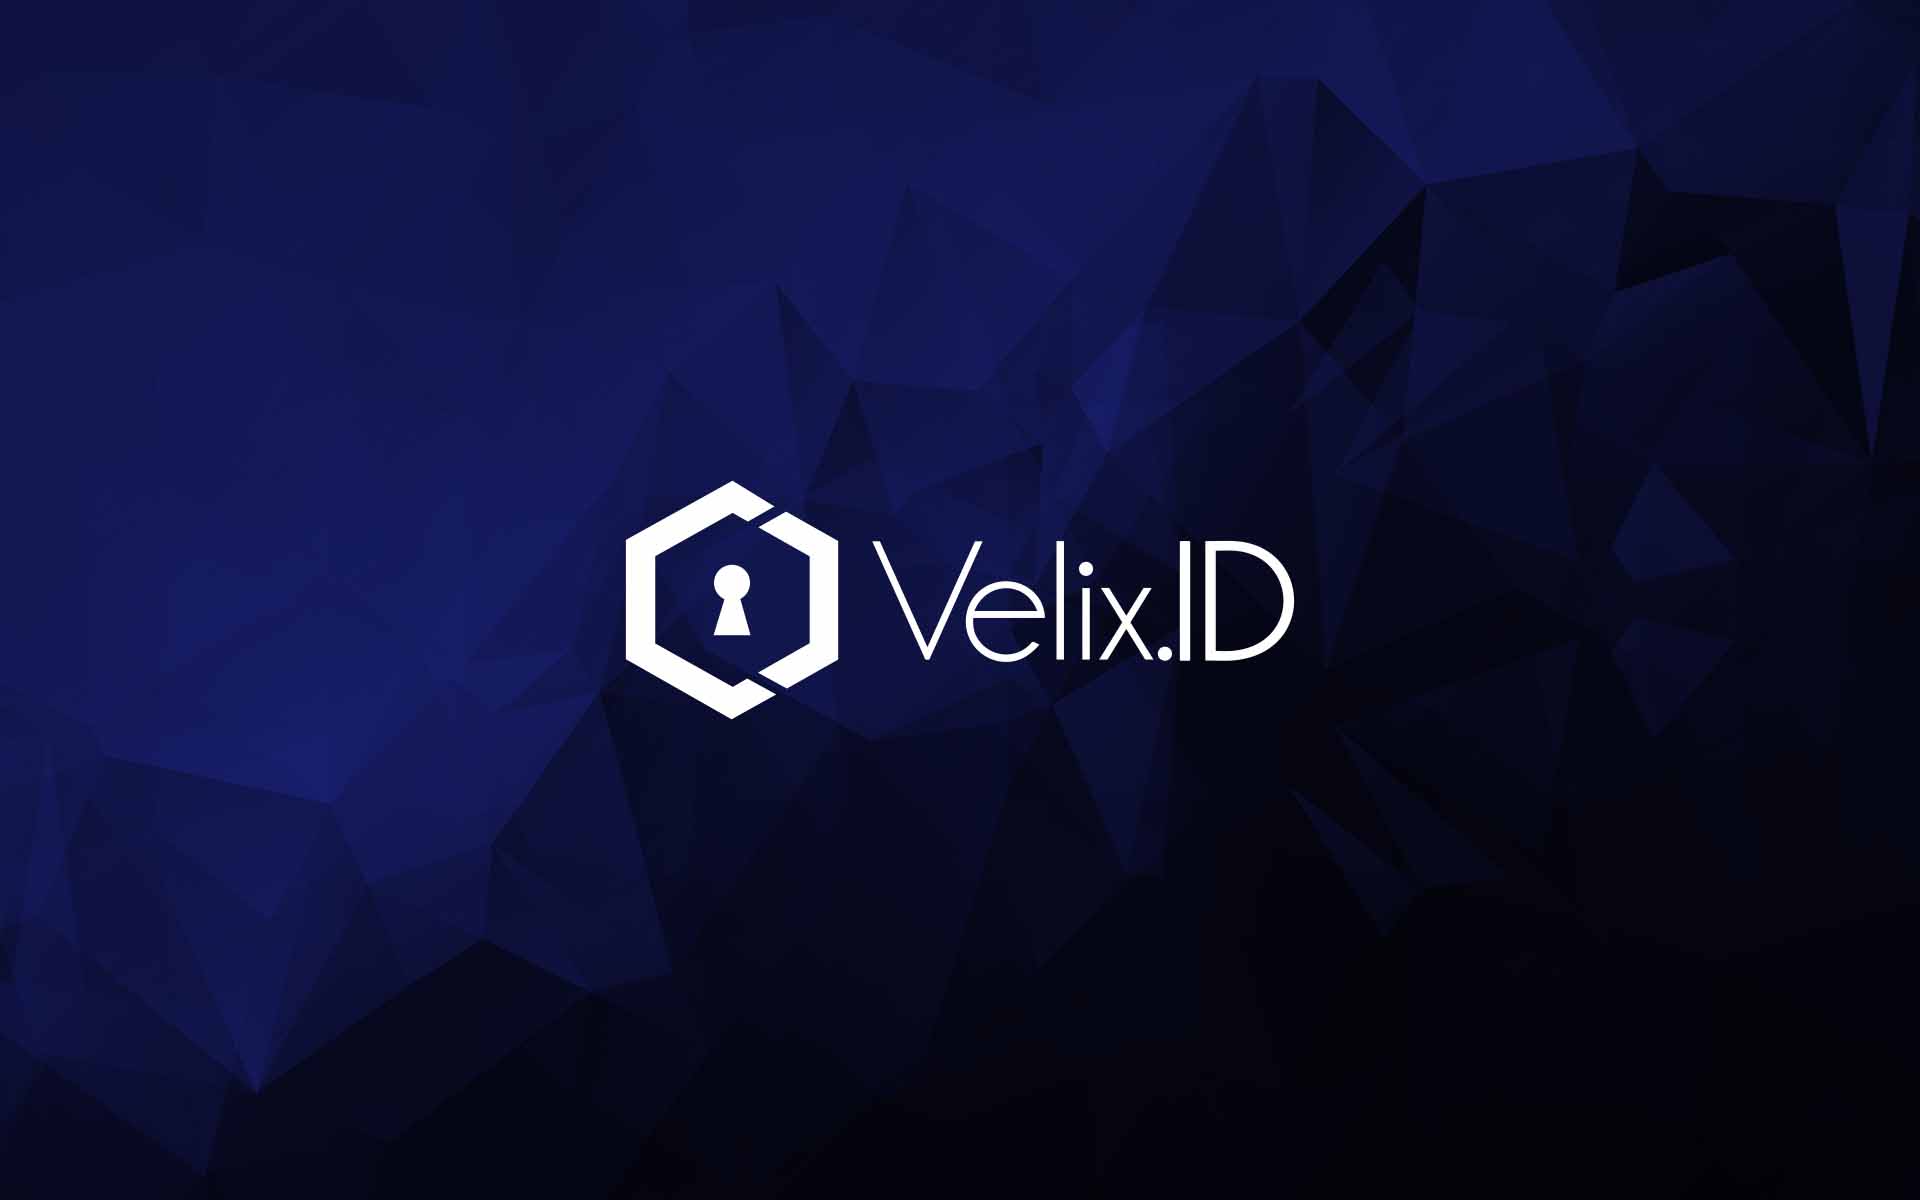 Velix.ID Partners with the Largest Cryptocurrency Exchanges in India to Revamp KYC